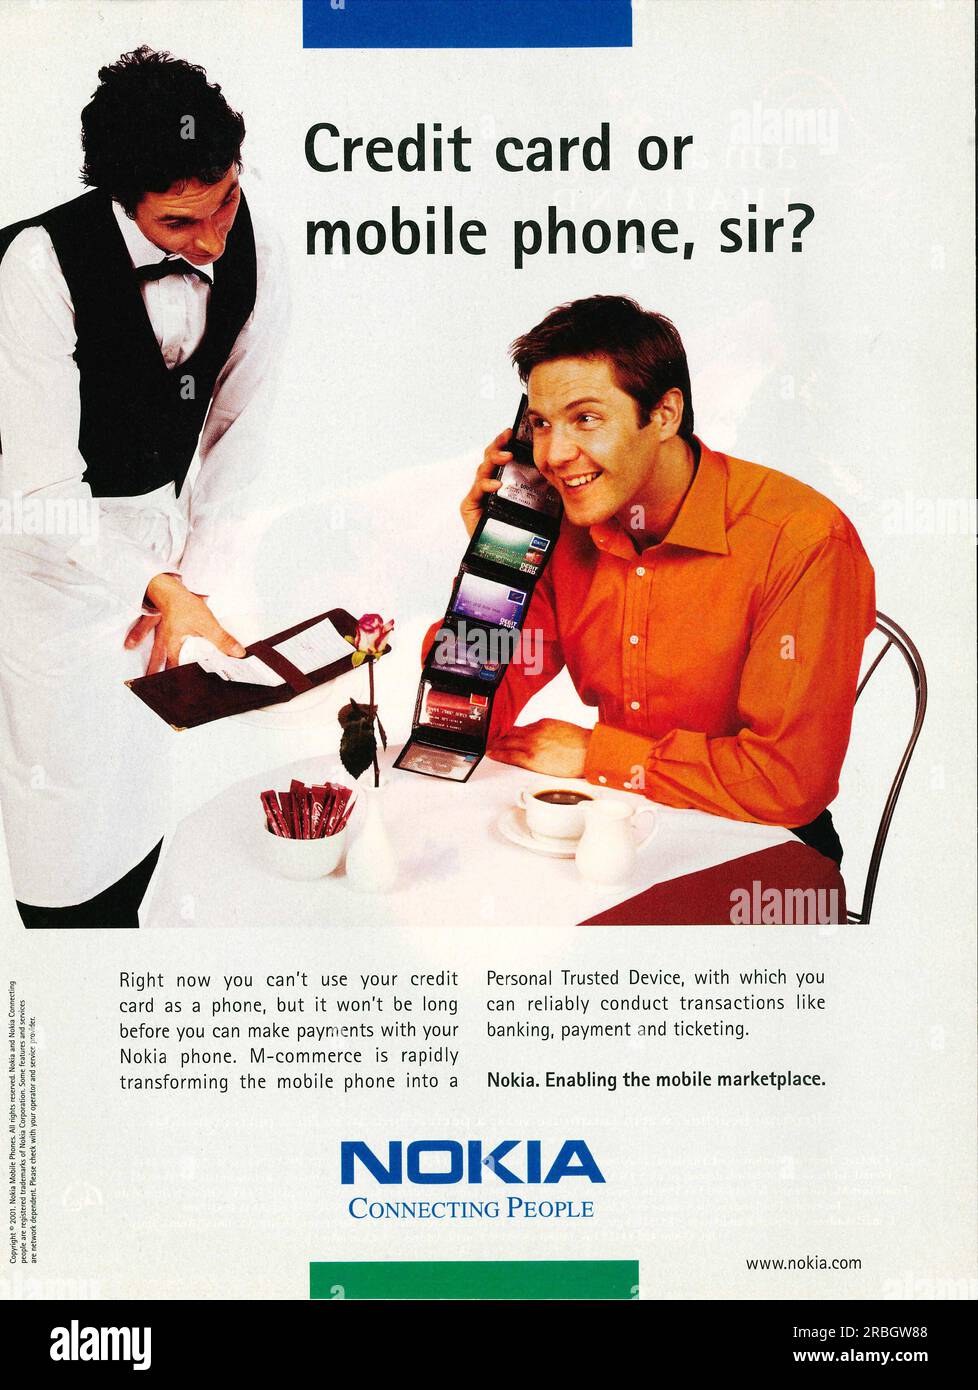 Nokia M-Phone, mobile marketplace, payments with Nokia phone advert in a magazine 2001. Nokia Connecting people campaign Stock Photo